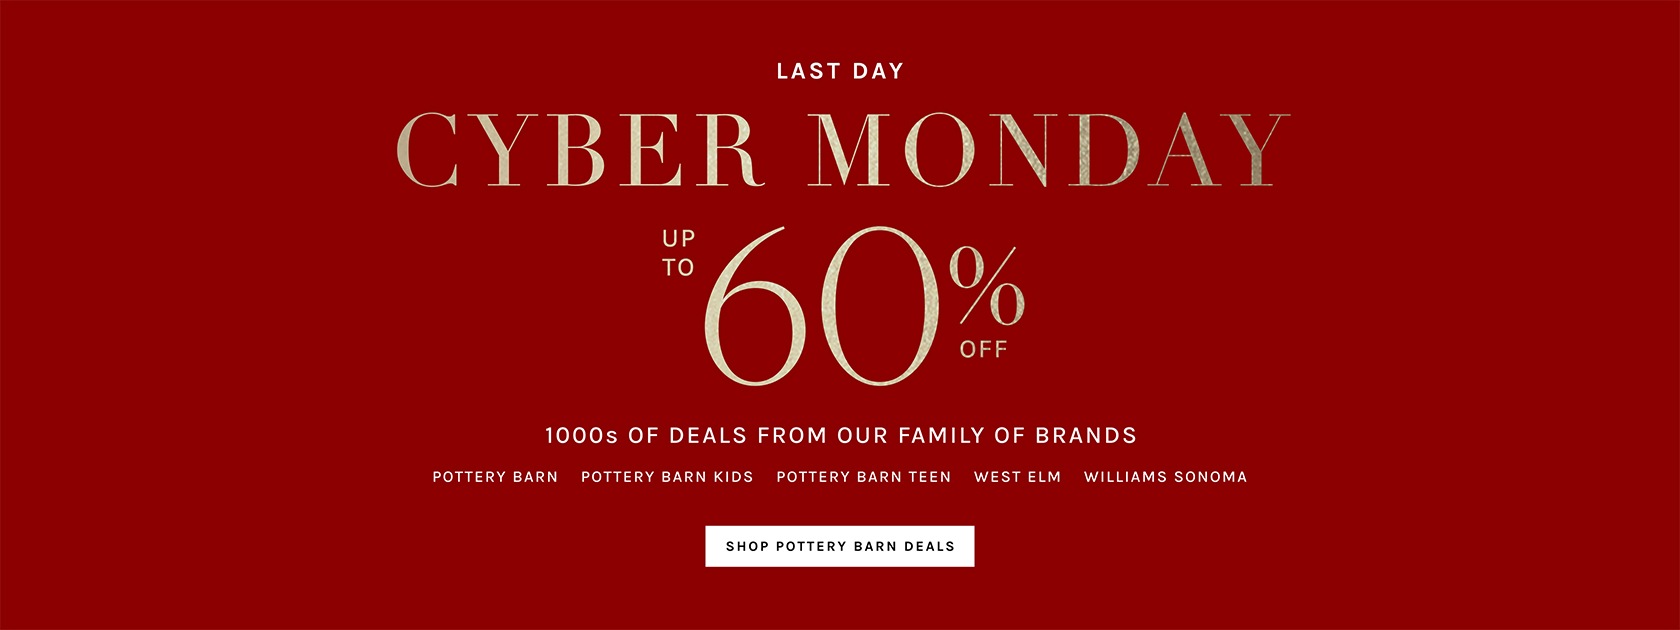 Cyber Monday: Up to 60% Off